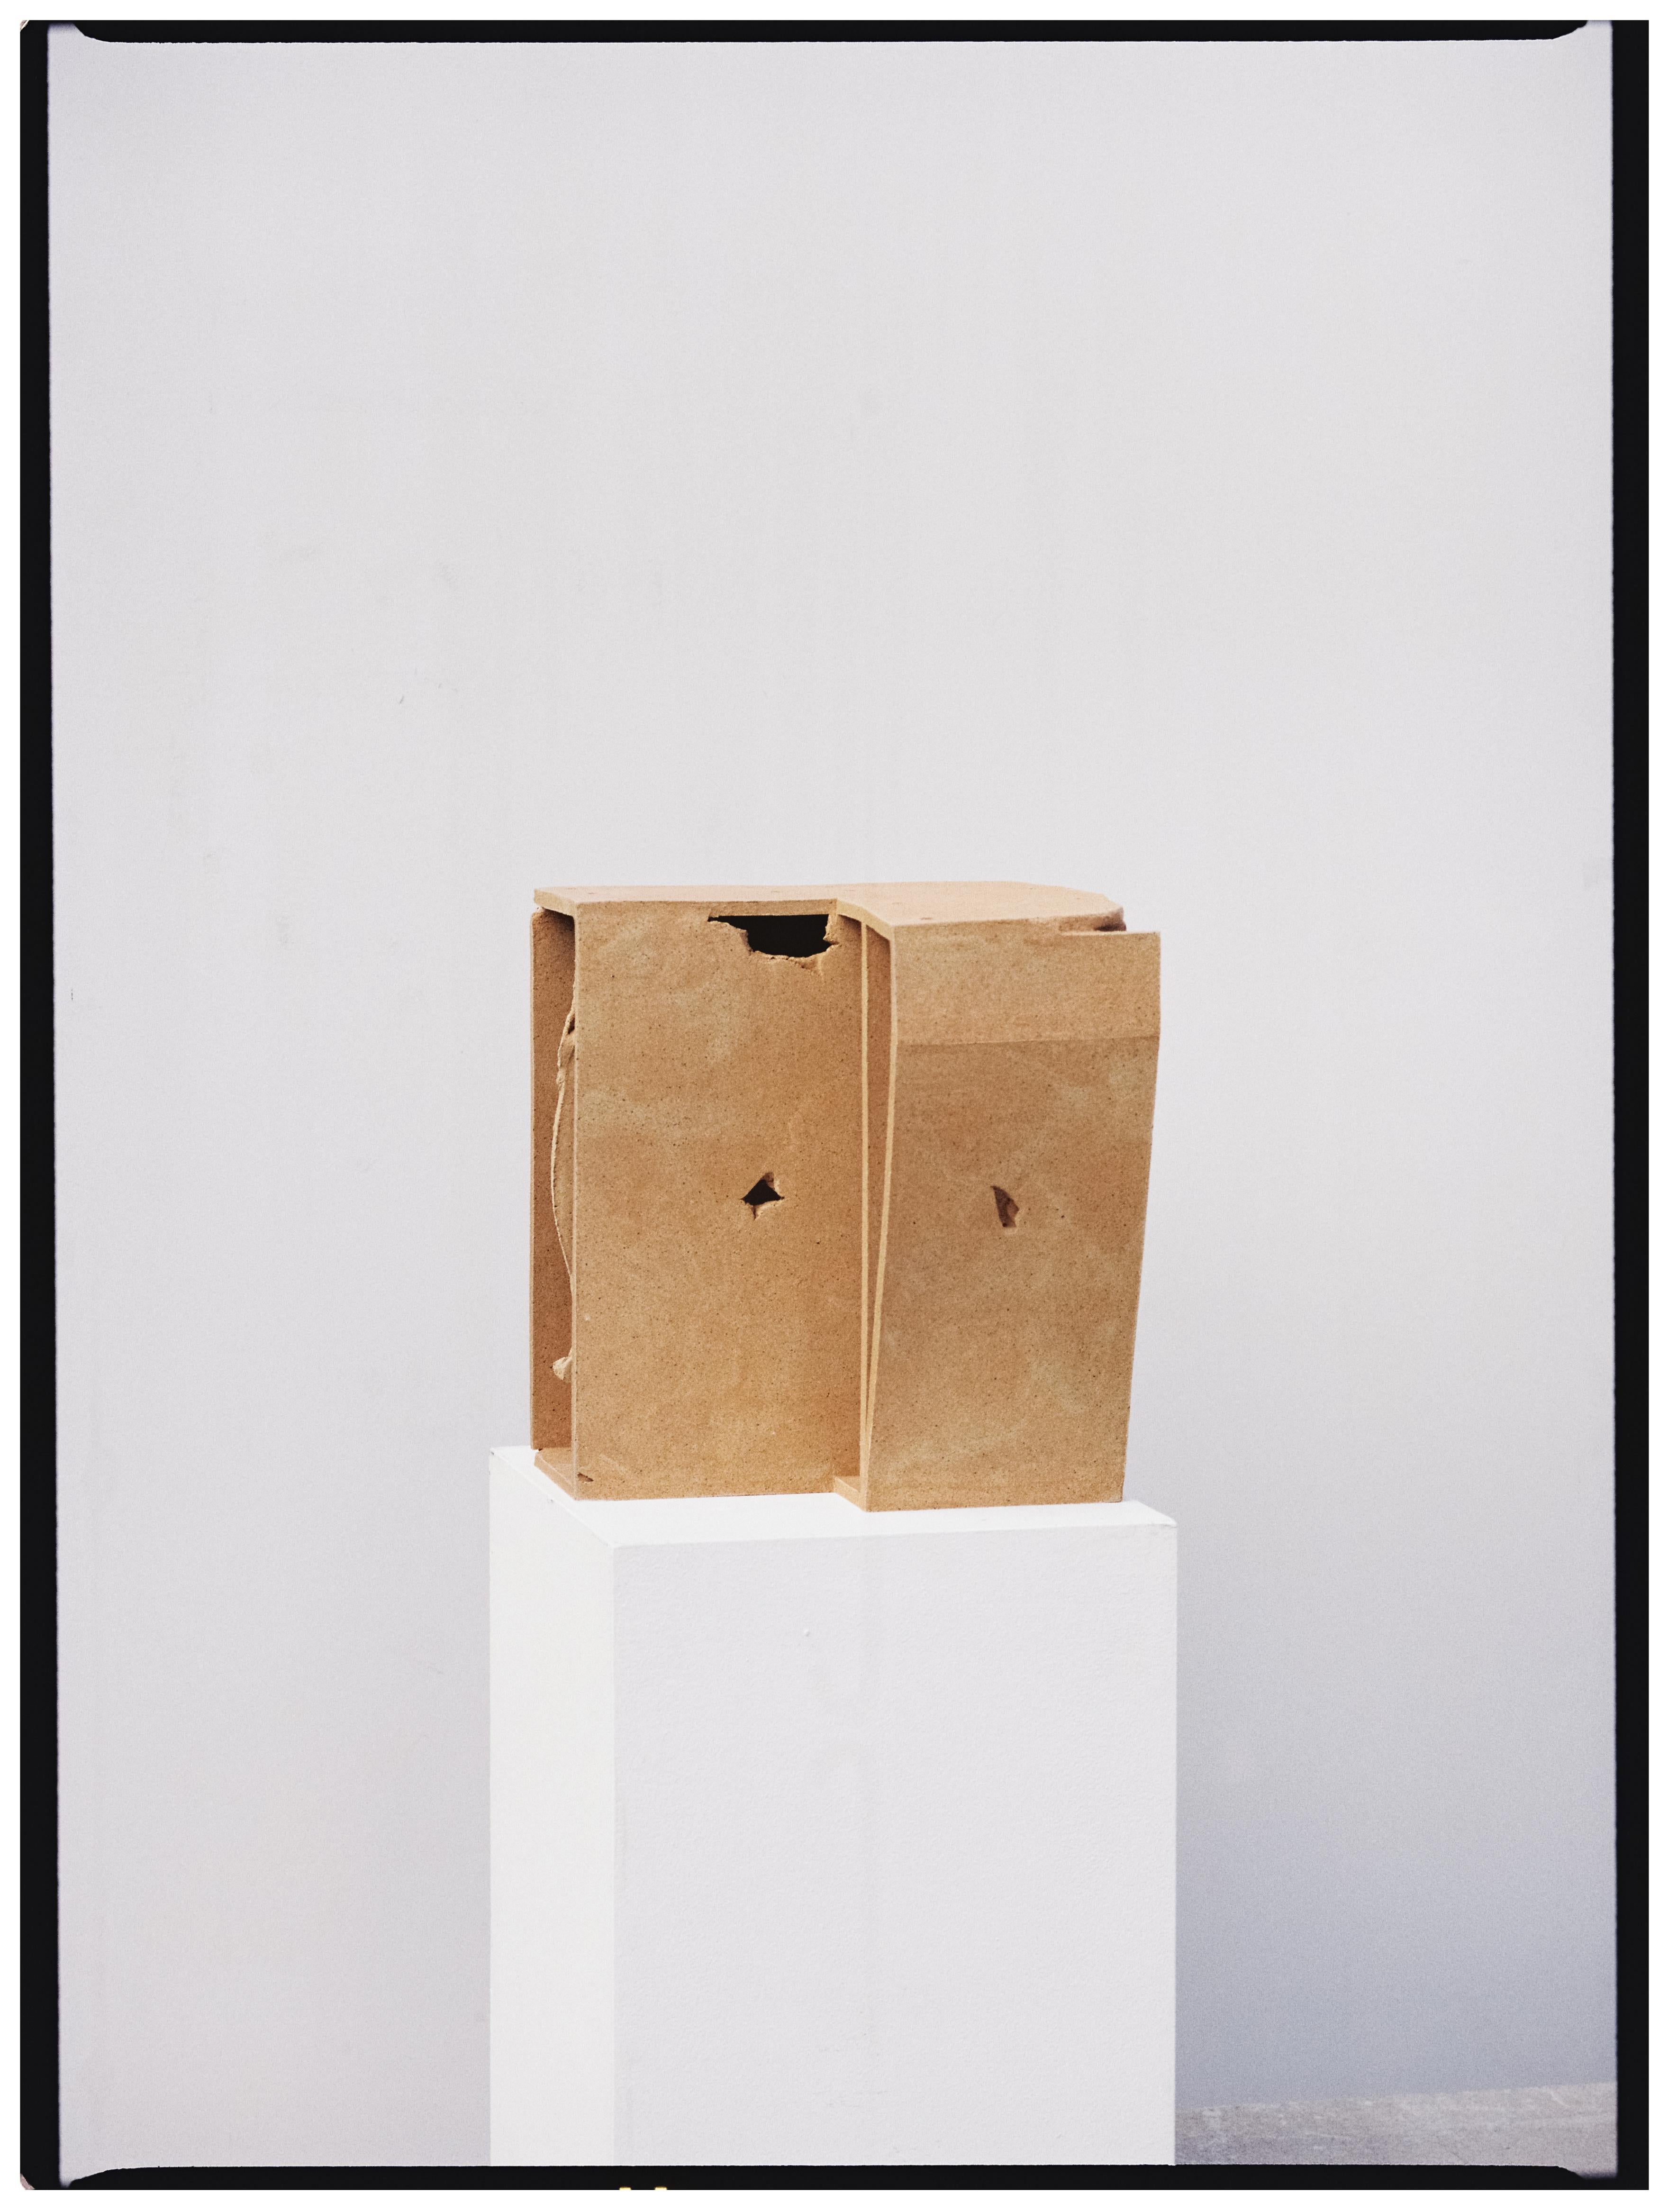 405 A Sculptural Shelving by Turbina
Dimensions: W 40 x D 35 x H 135 cm
Materials: Fired Clay

The 405 project refers to the flow of movement, the path, the road. It is through the journey along the road that the human being (re)constructs the